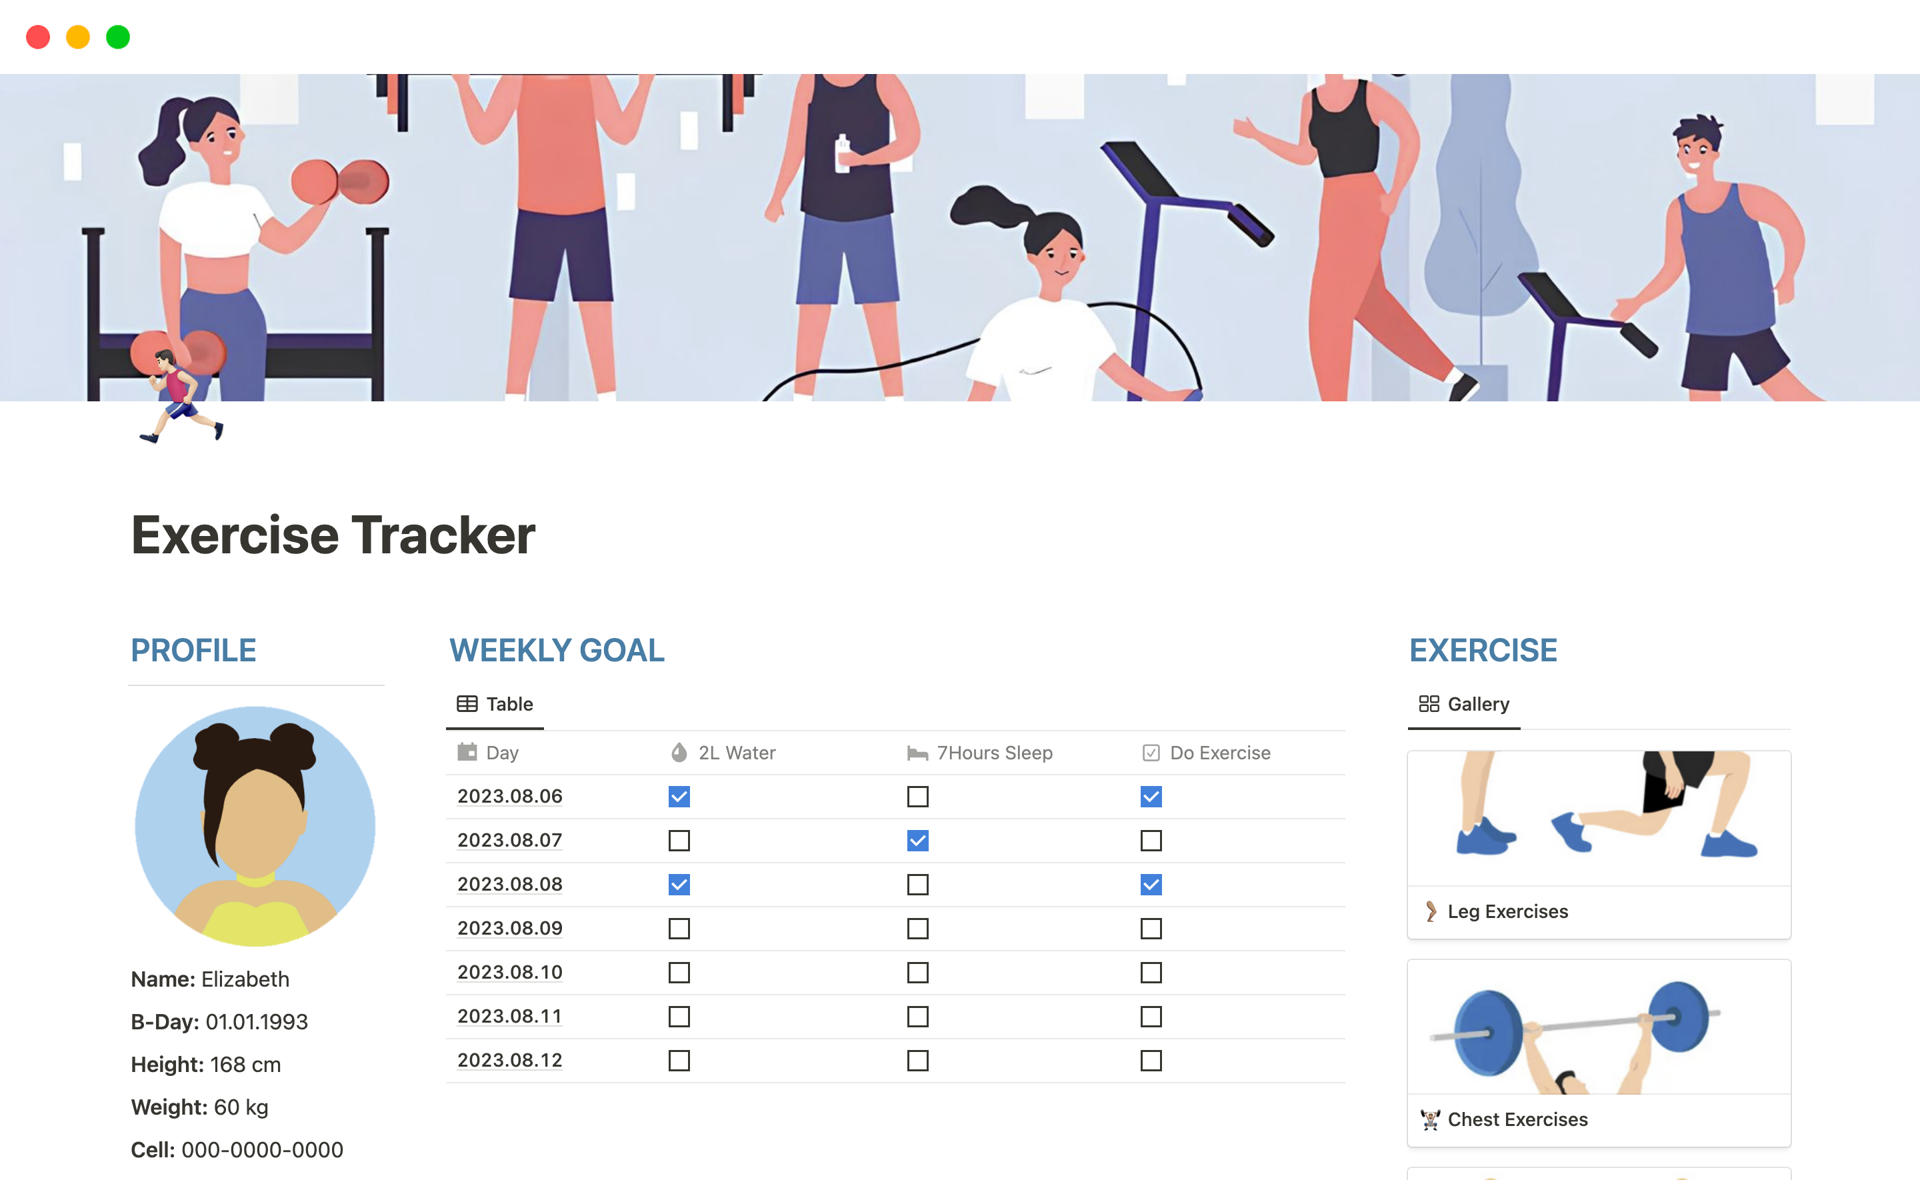 This template can effectively manage your workout schedule without effort and time!